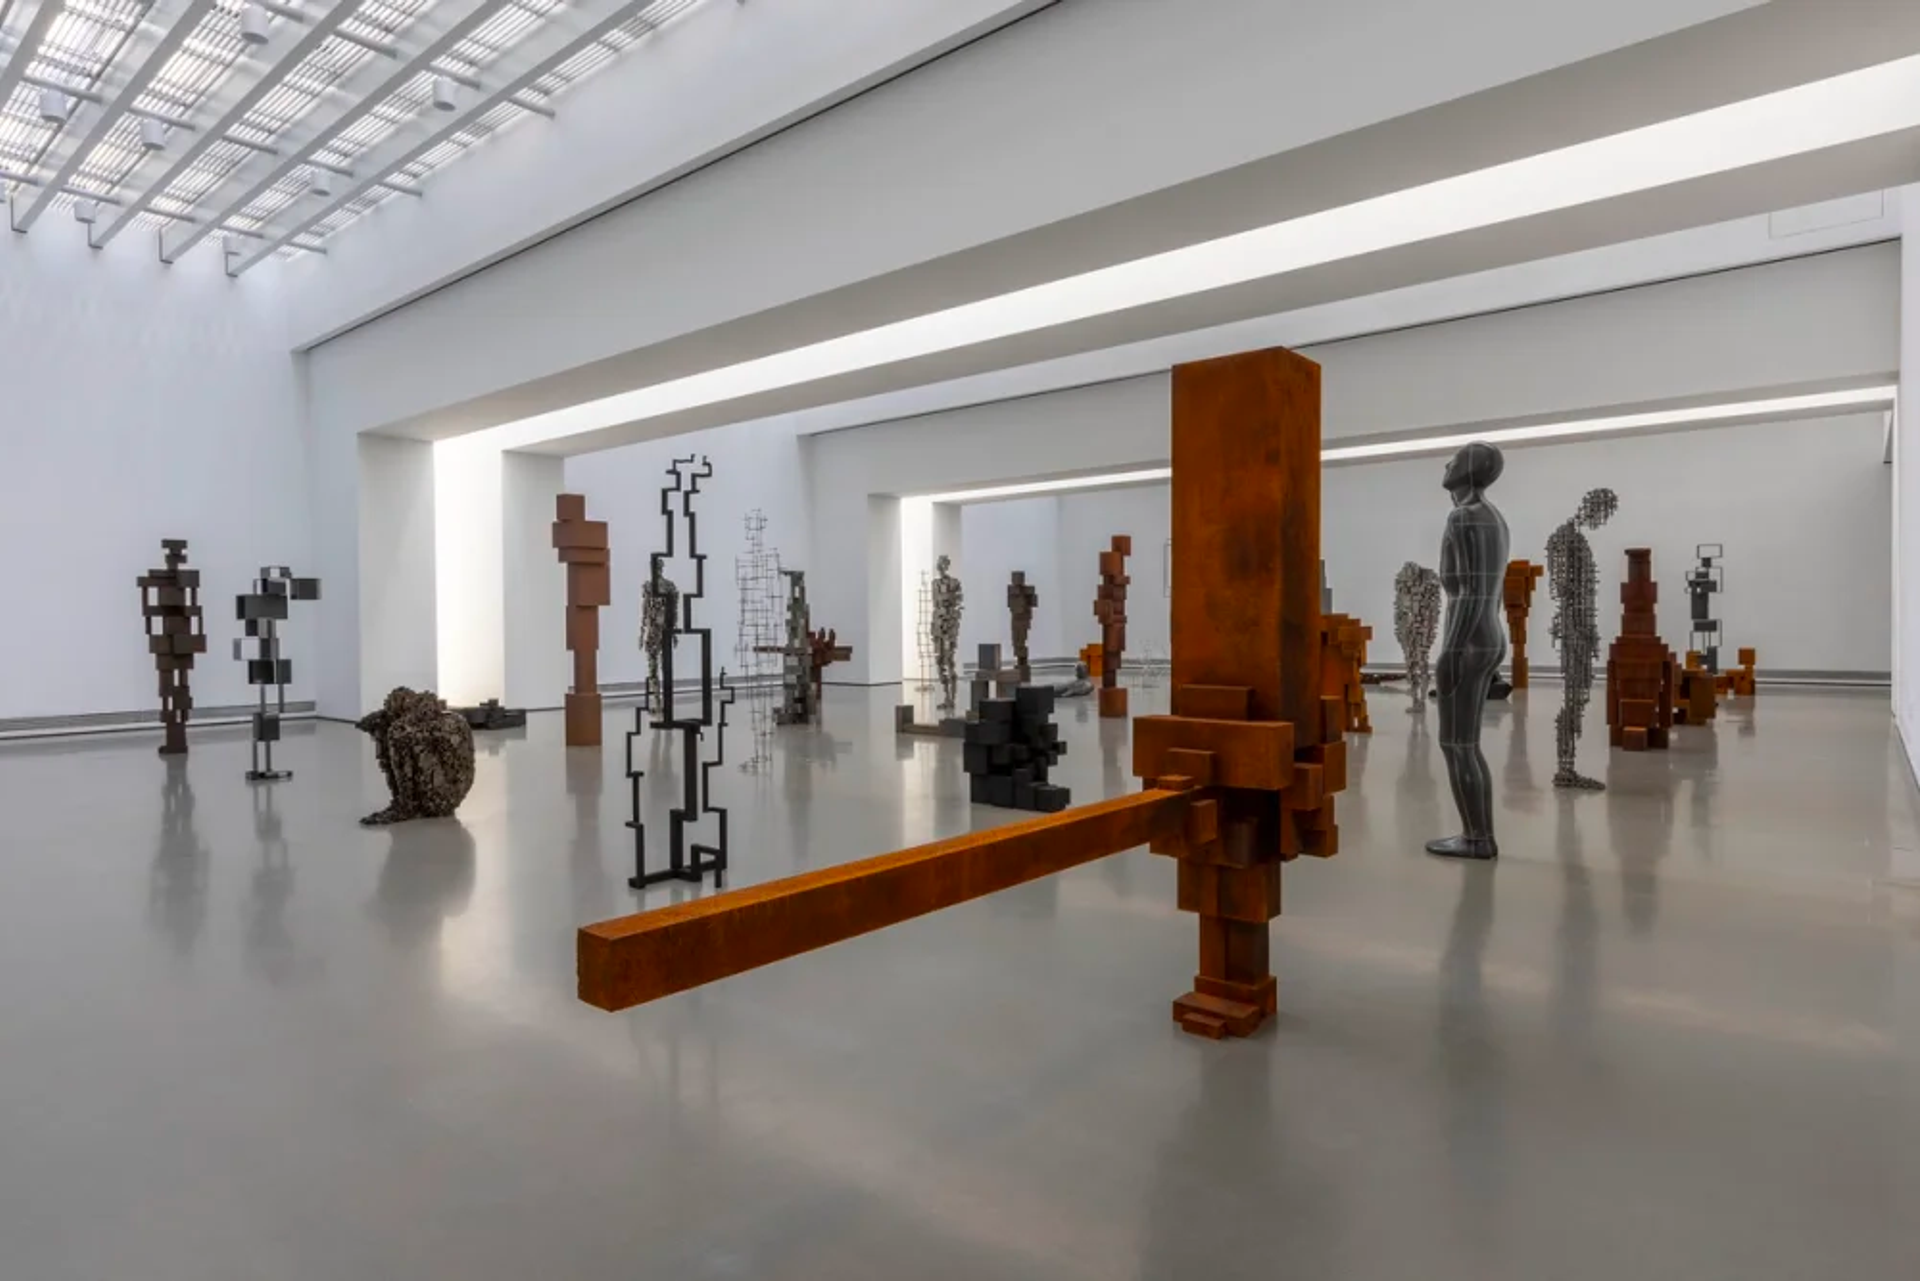 An installation view of various sculptures resembling the human form built from metal and steel.